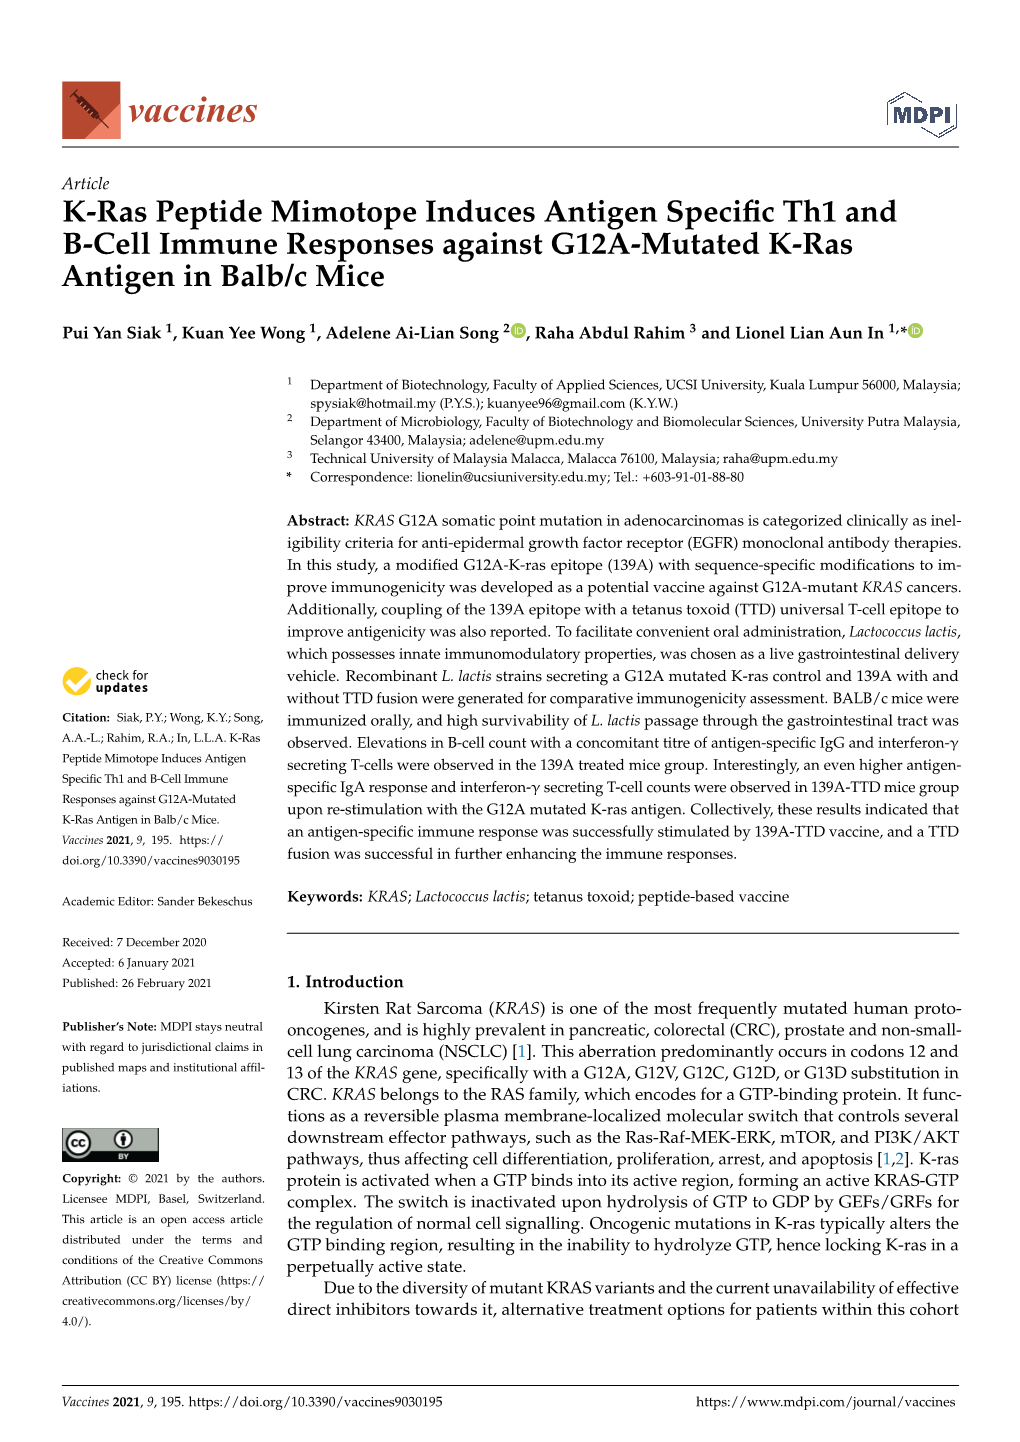 K-Ras Peptide Mimotope Induces Antigen Specific Th1 and B-Cell Immune Responses Against G12A-Mutated K-Ras Antigen in Balb/C